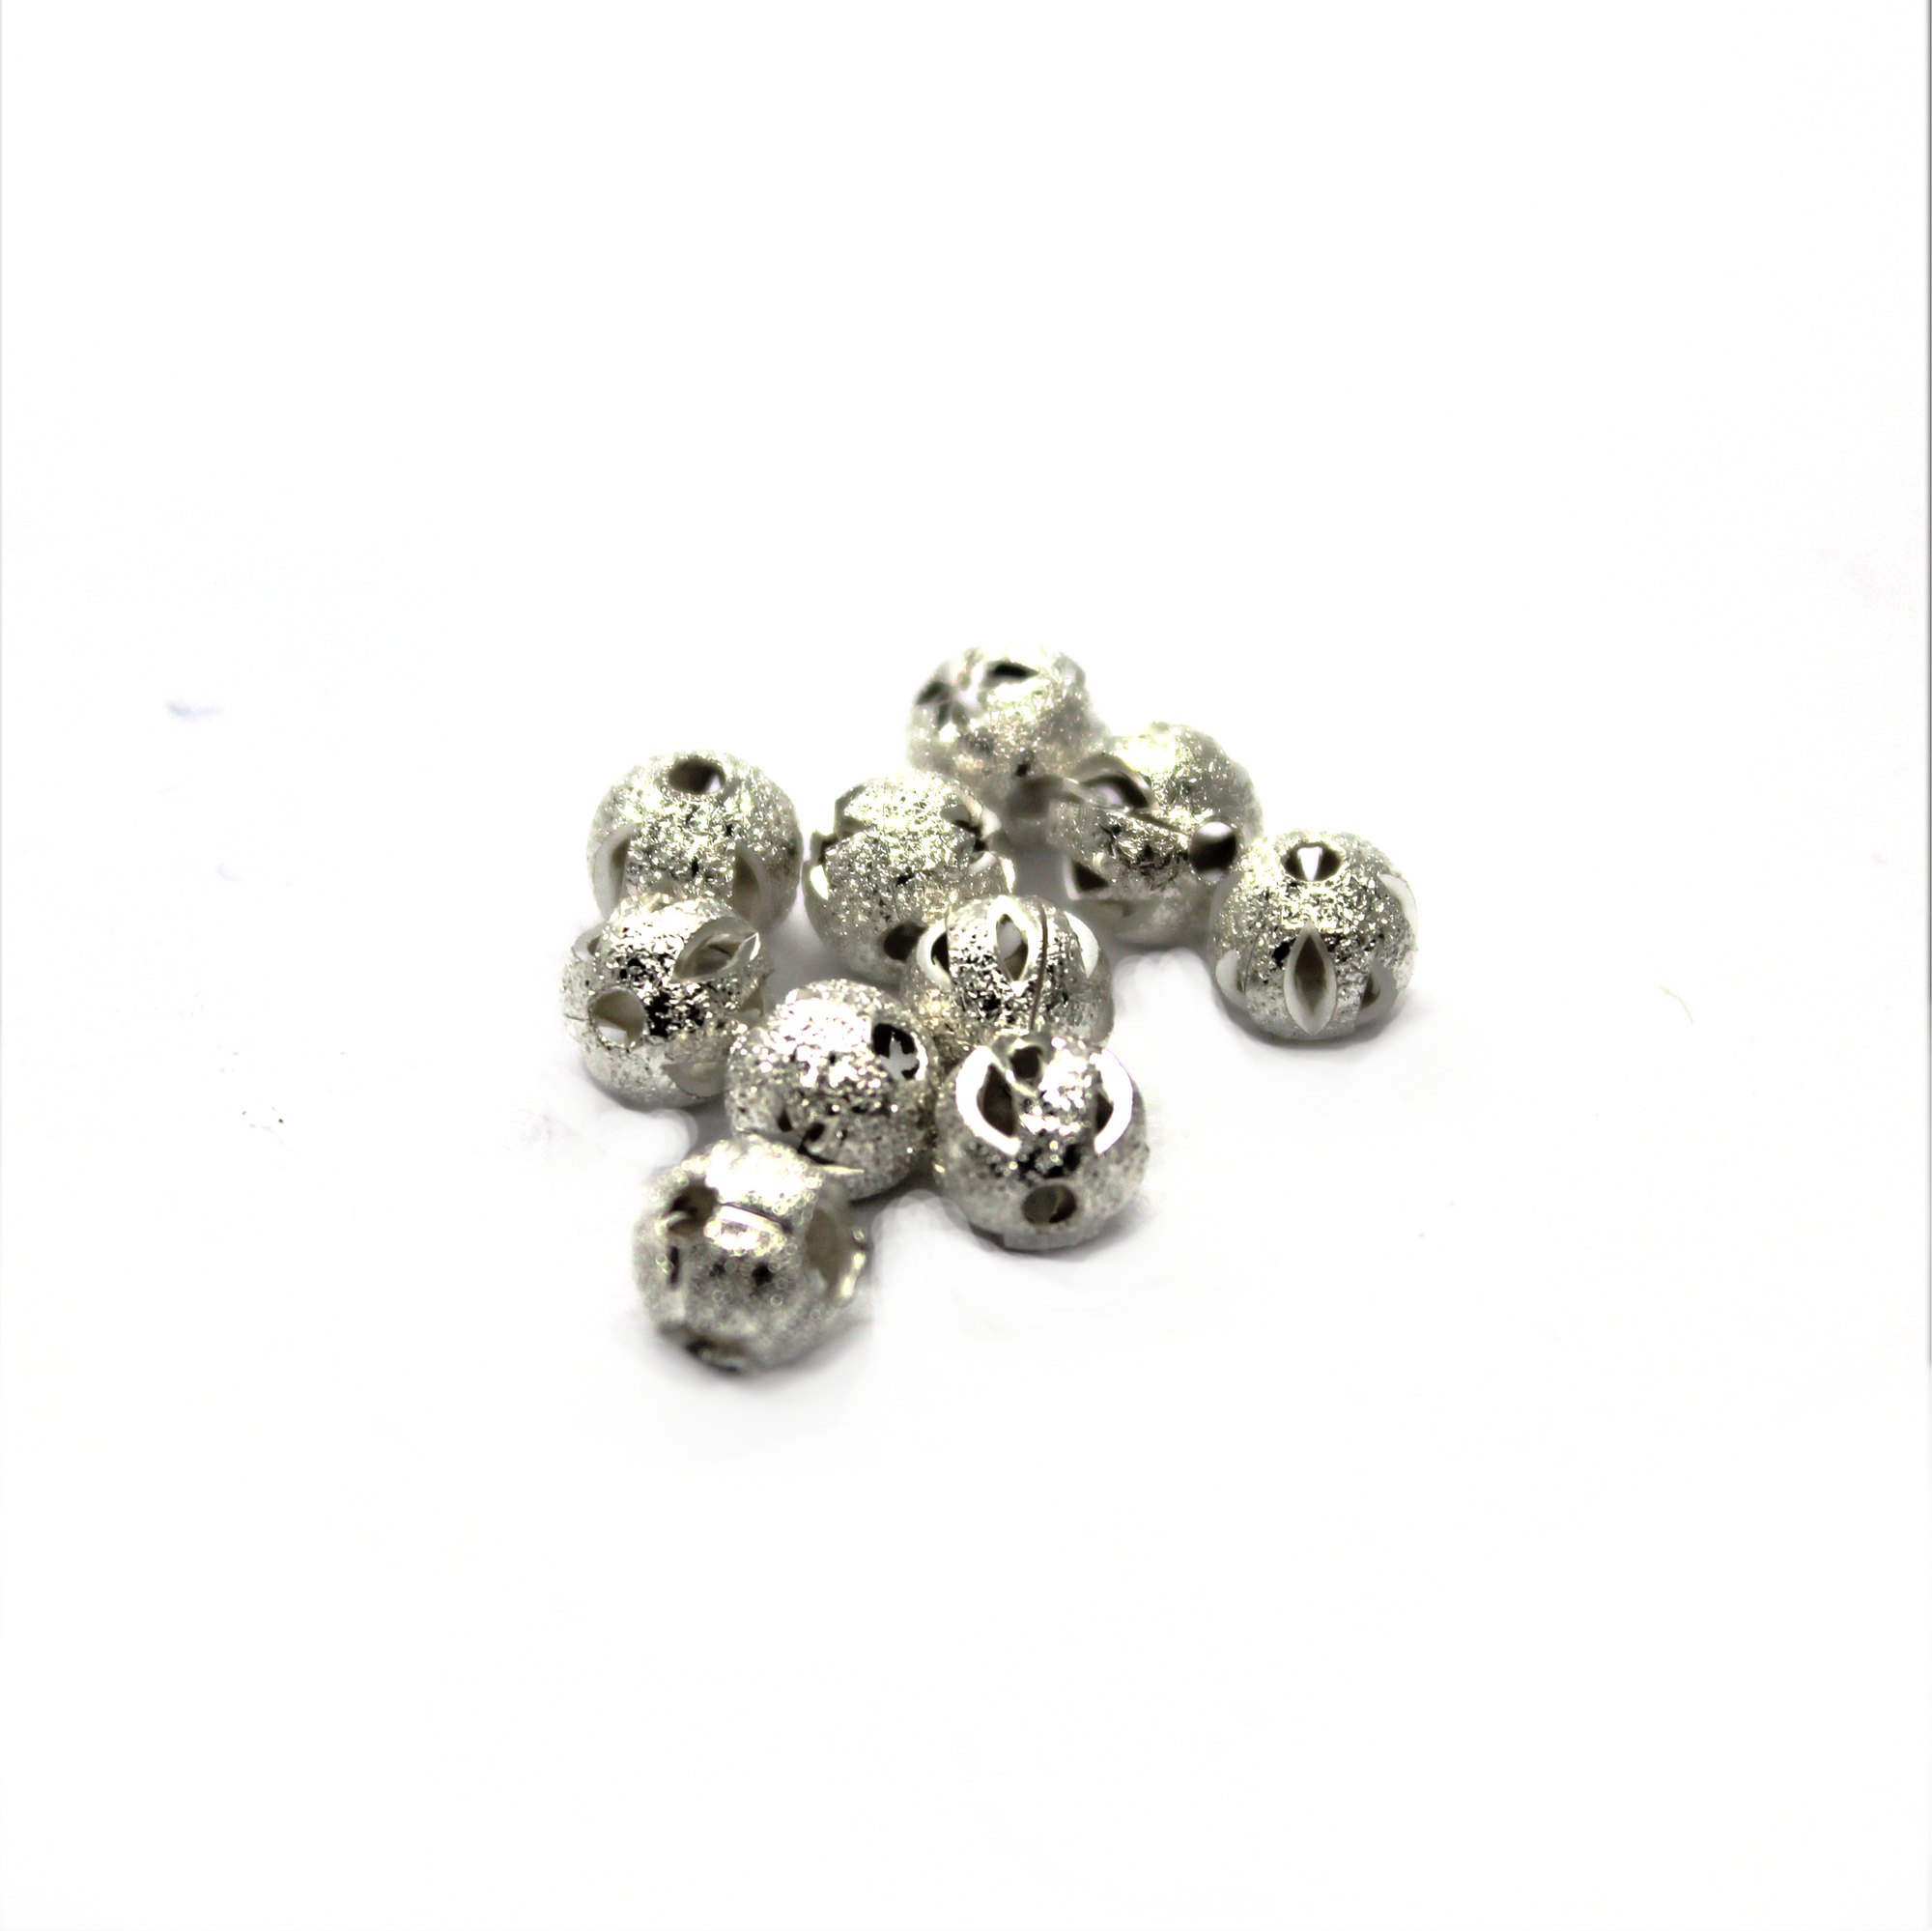 Spacers, Sparkly Six-Hole Ball Spacer, Alloy, Bright Silver, 6mm X 5mm, Sold Per pkg of 10